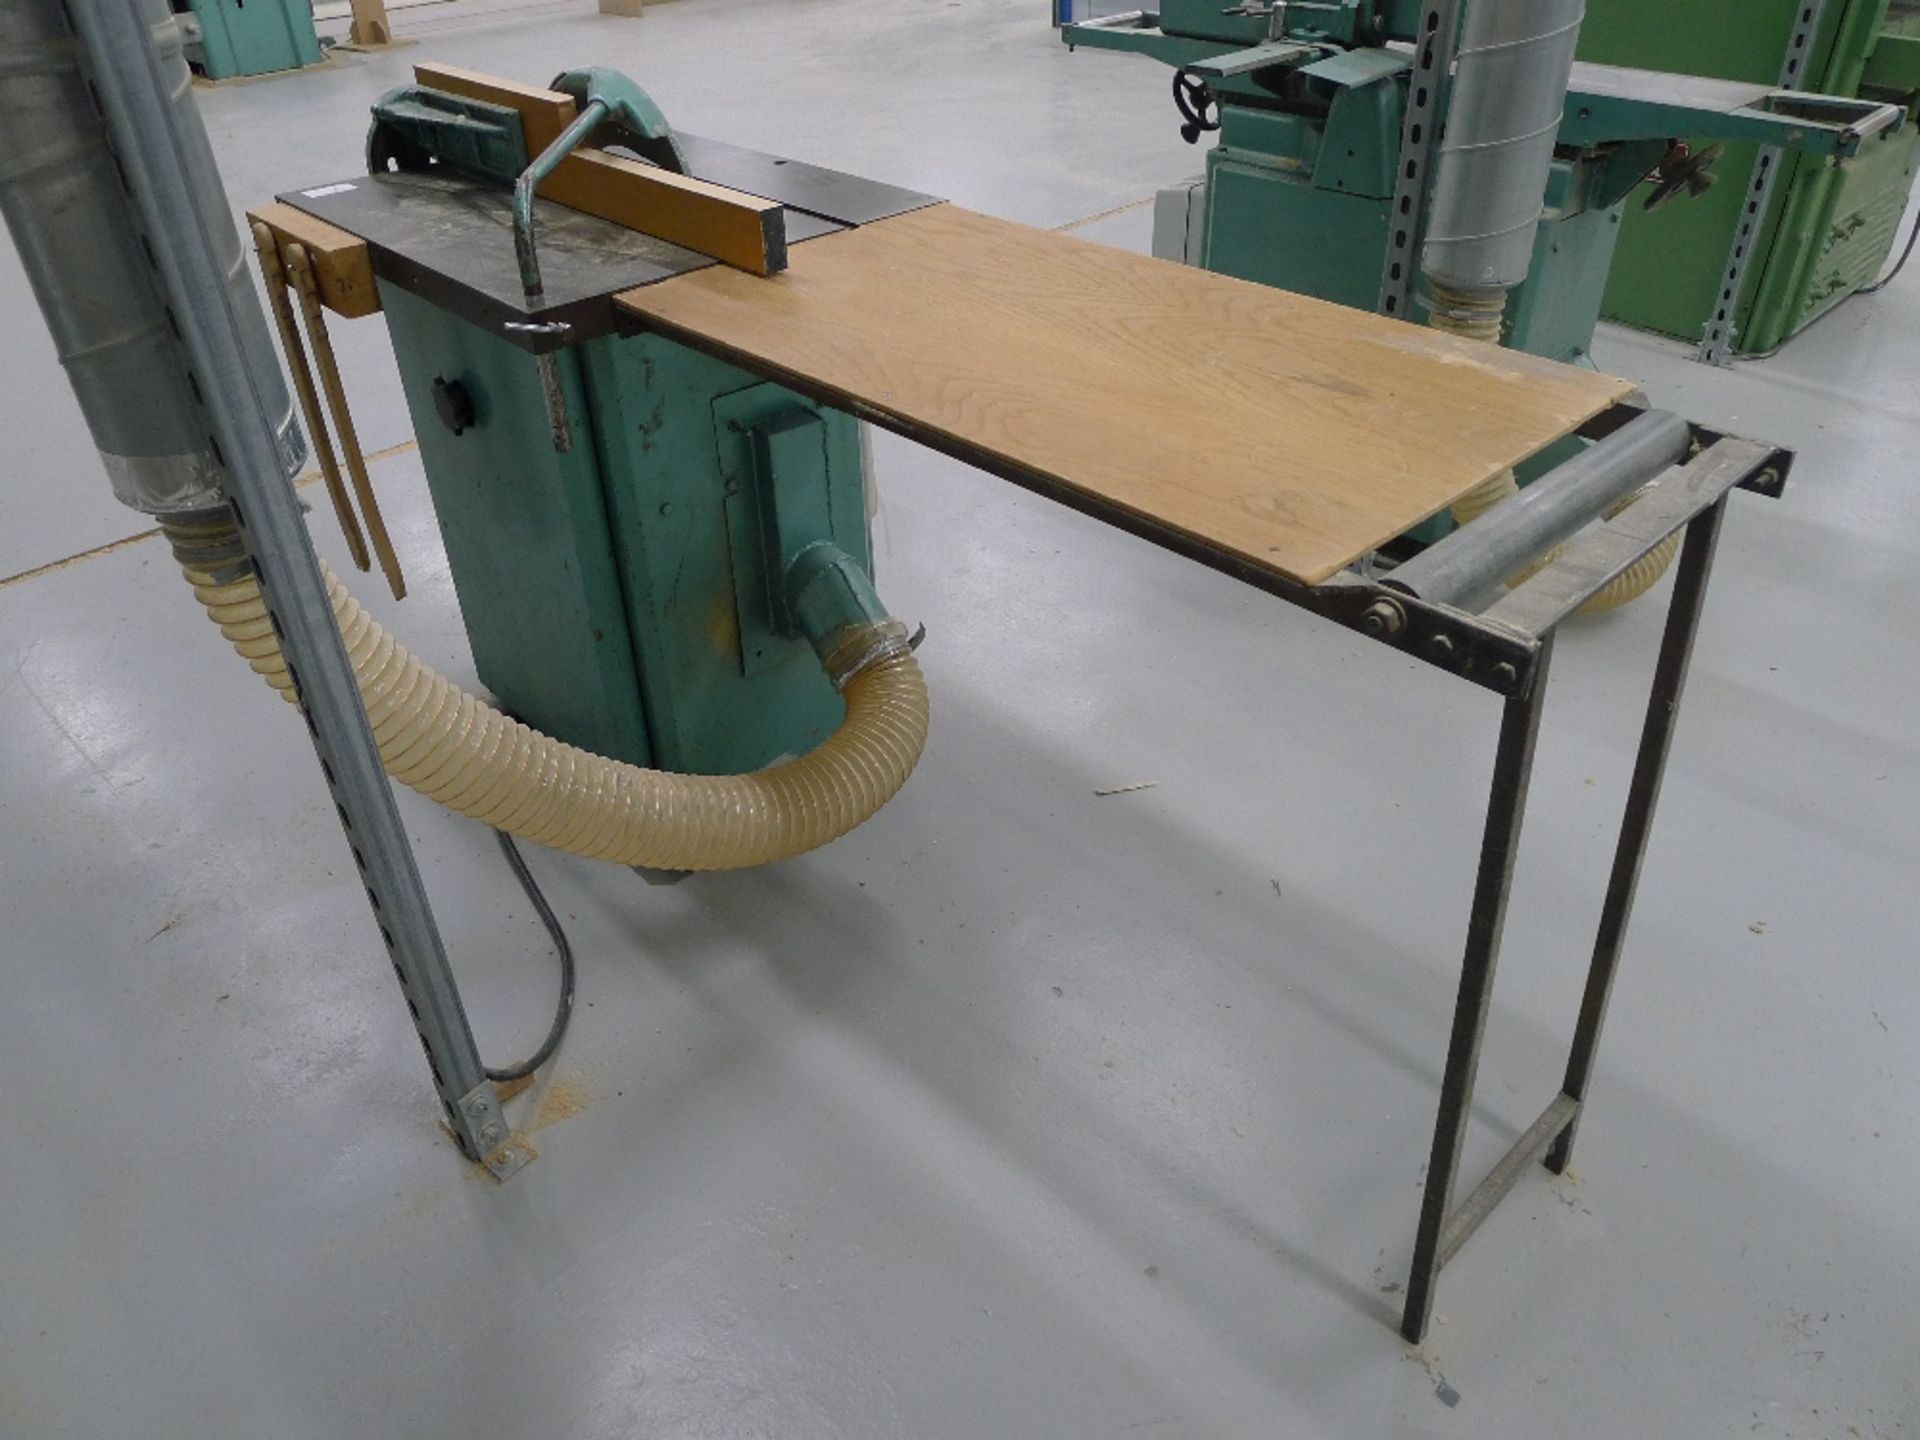 1 circular saw bench by Multico type A3, s/n 3876, 3ph, with rear feed support table. This saw has - Image 6 of 6